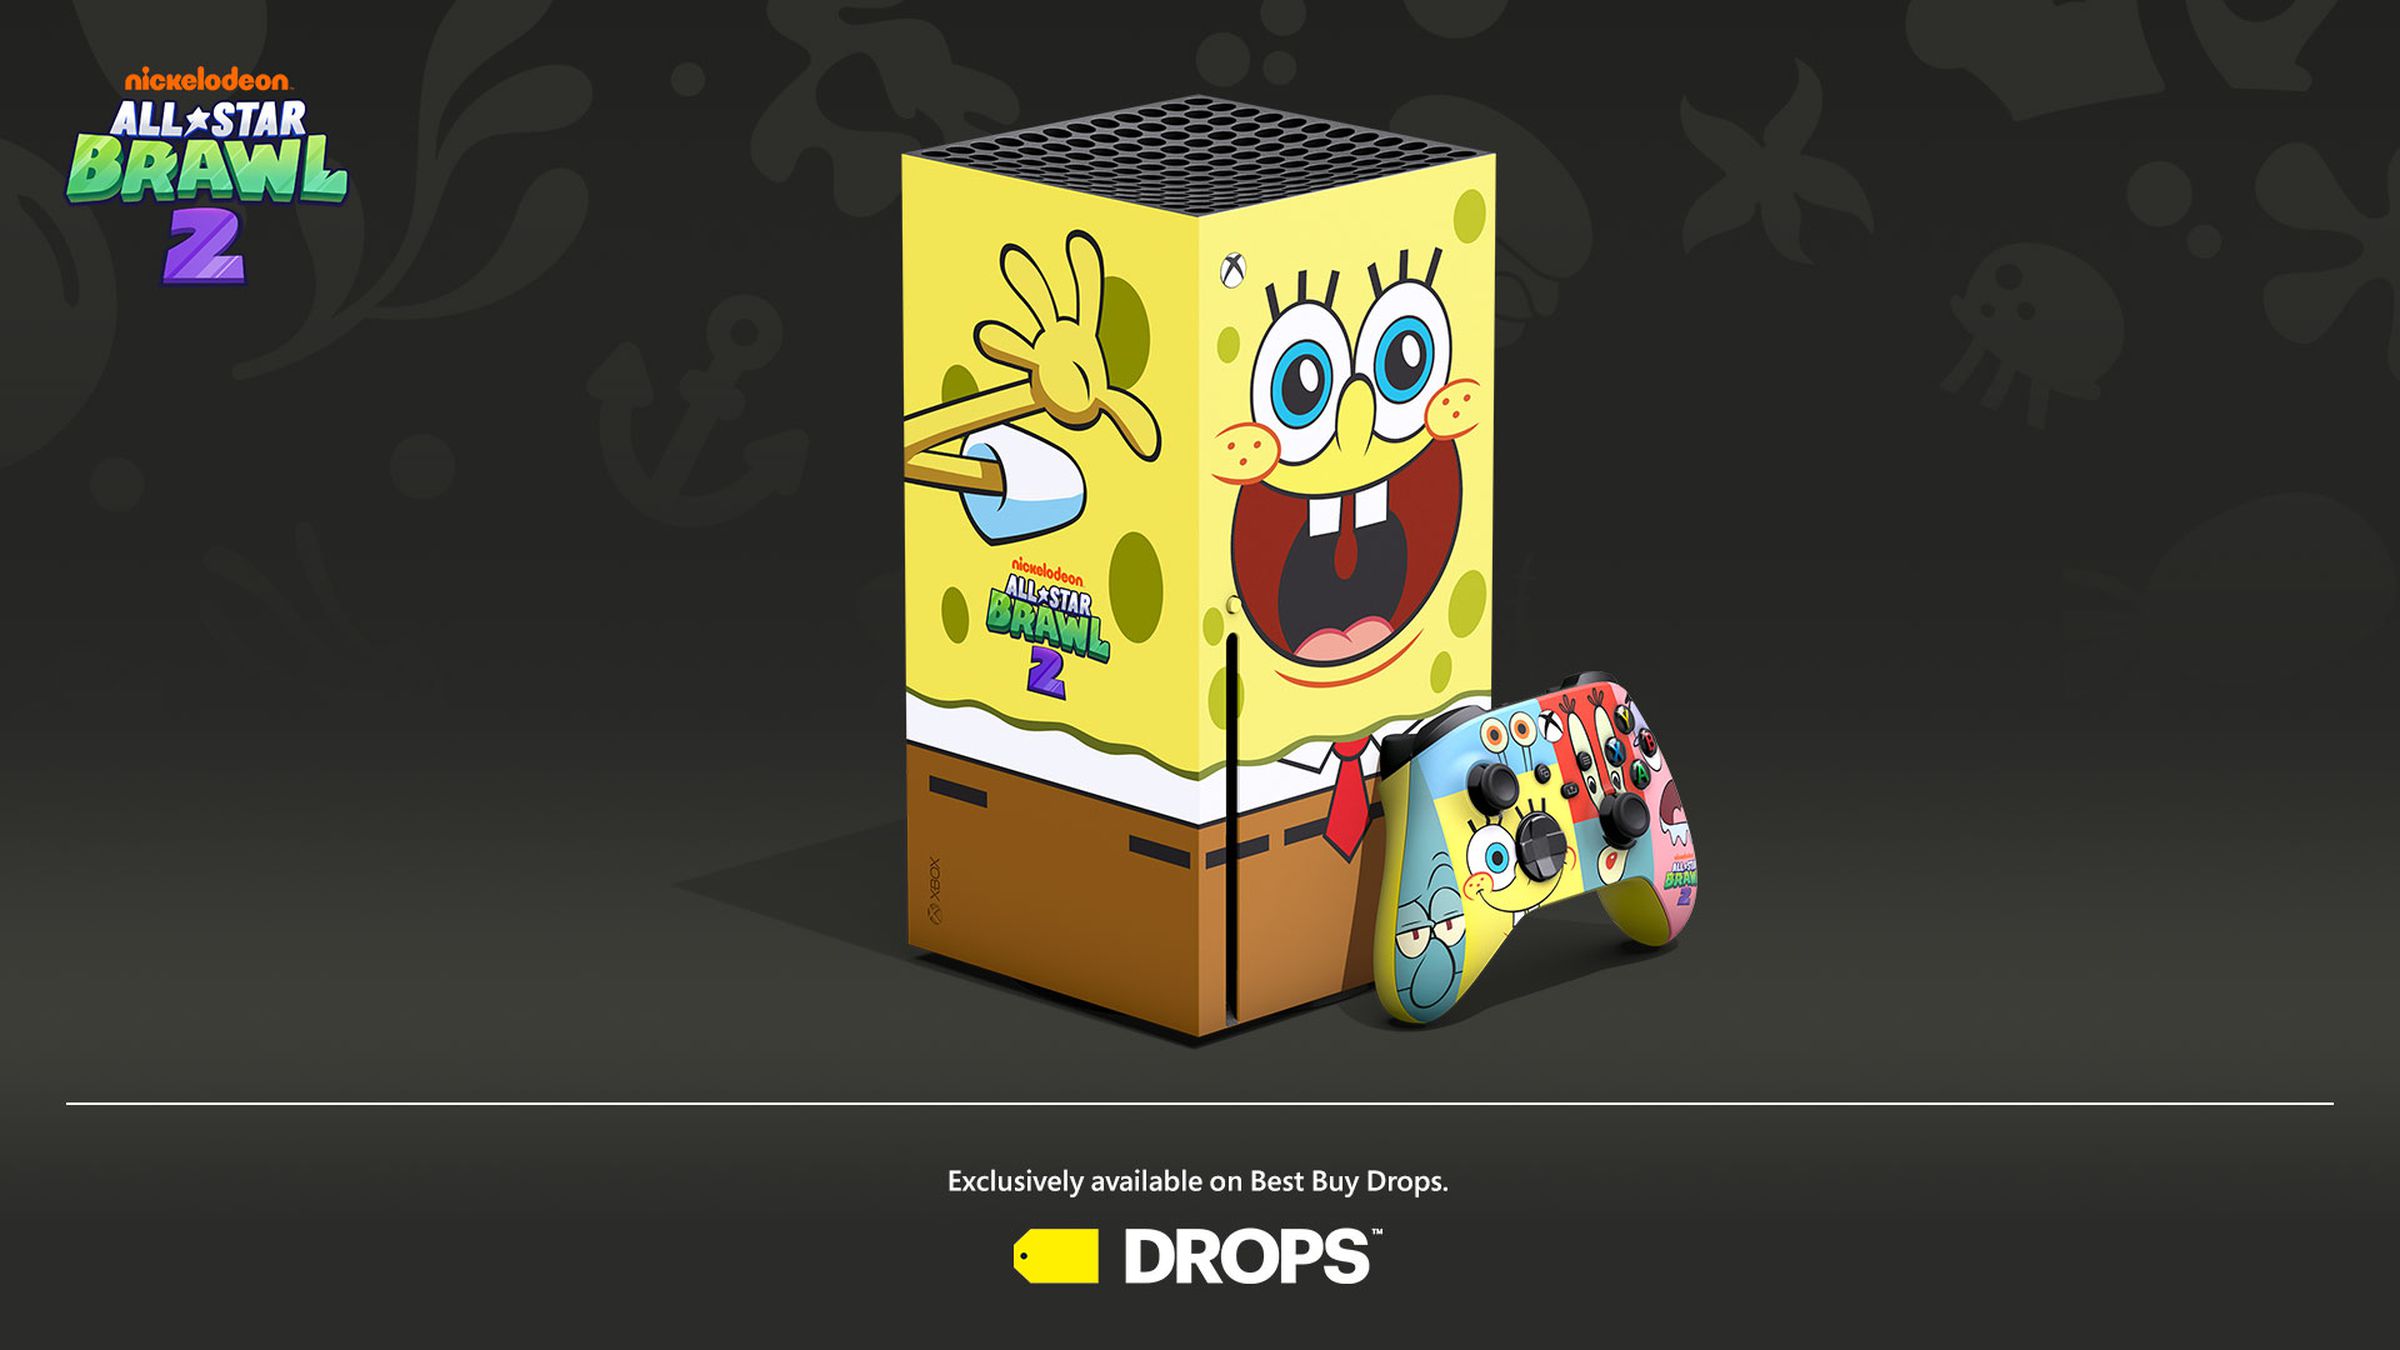 The limited edition SpongeBob Xbox is $699.